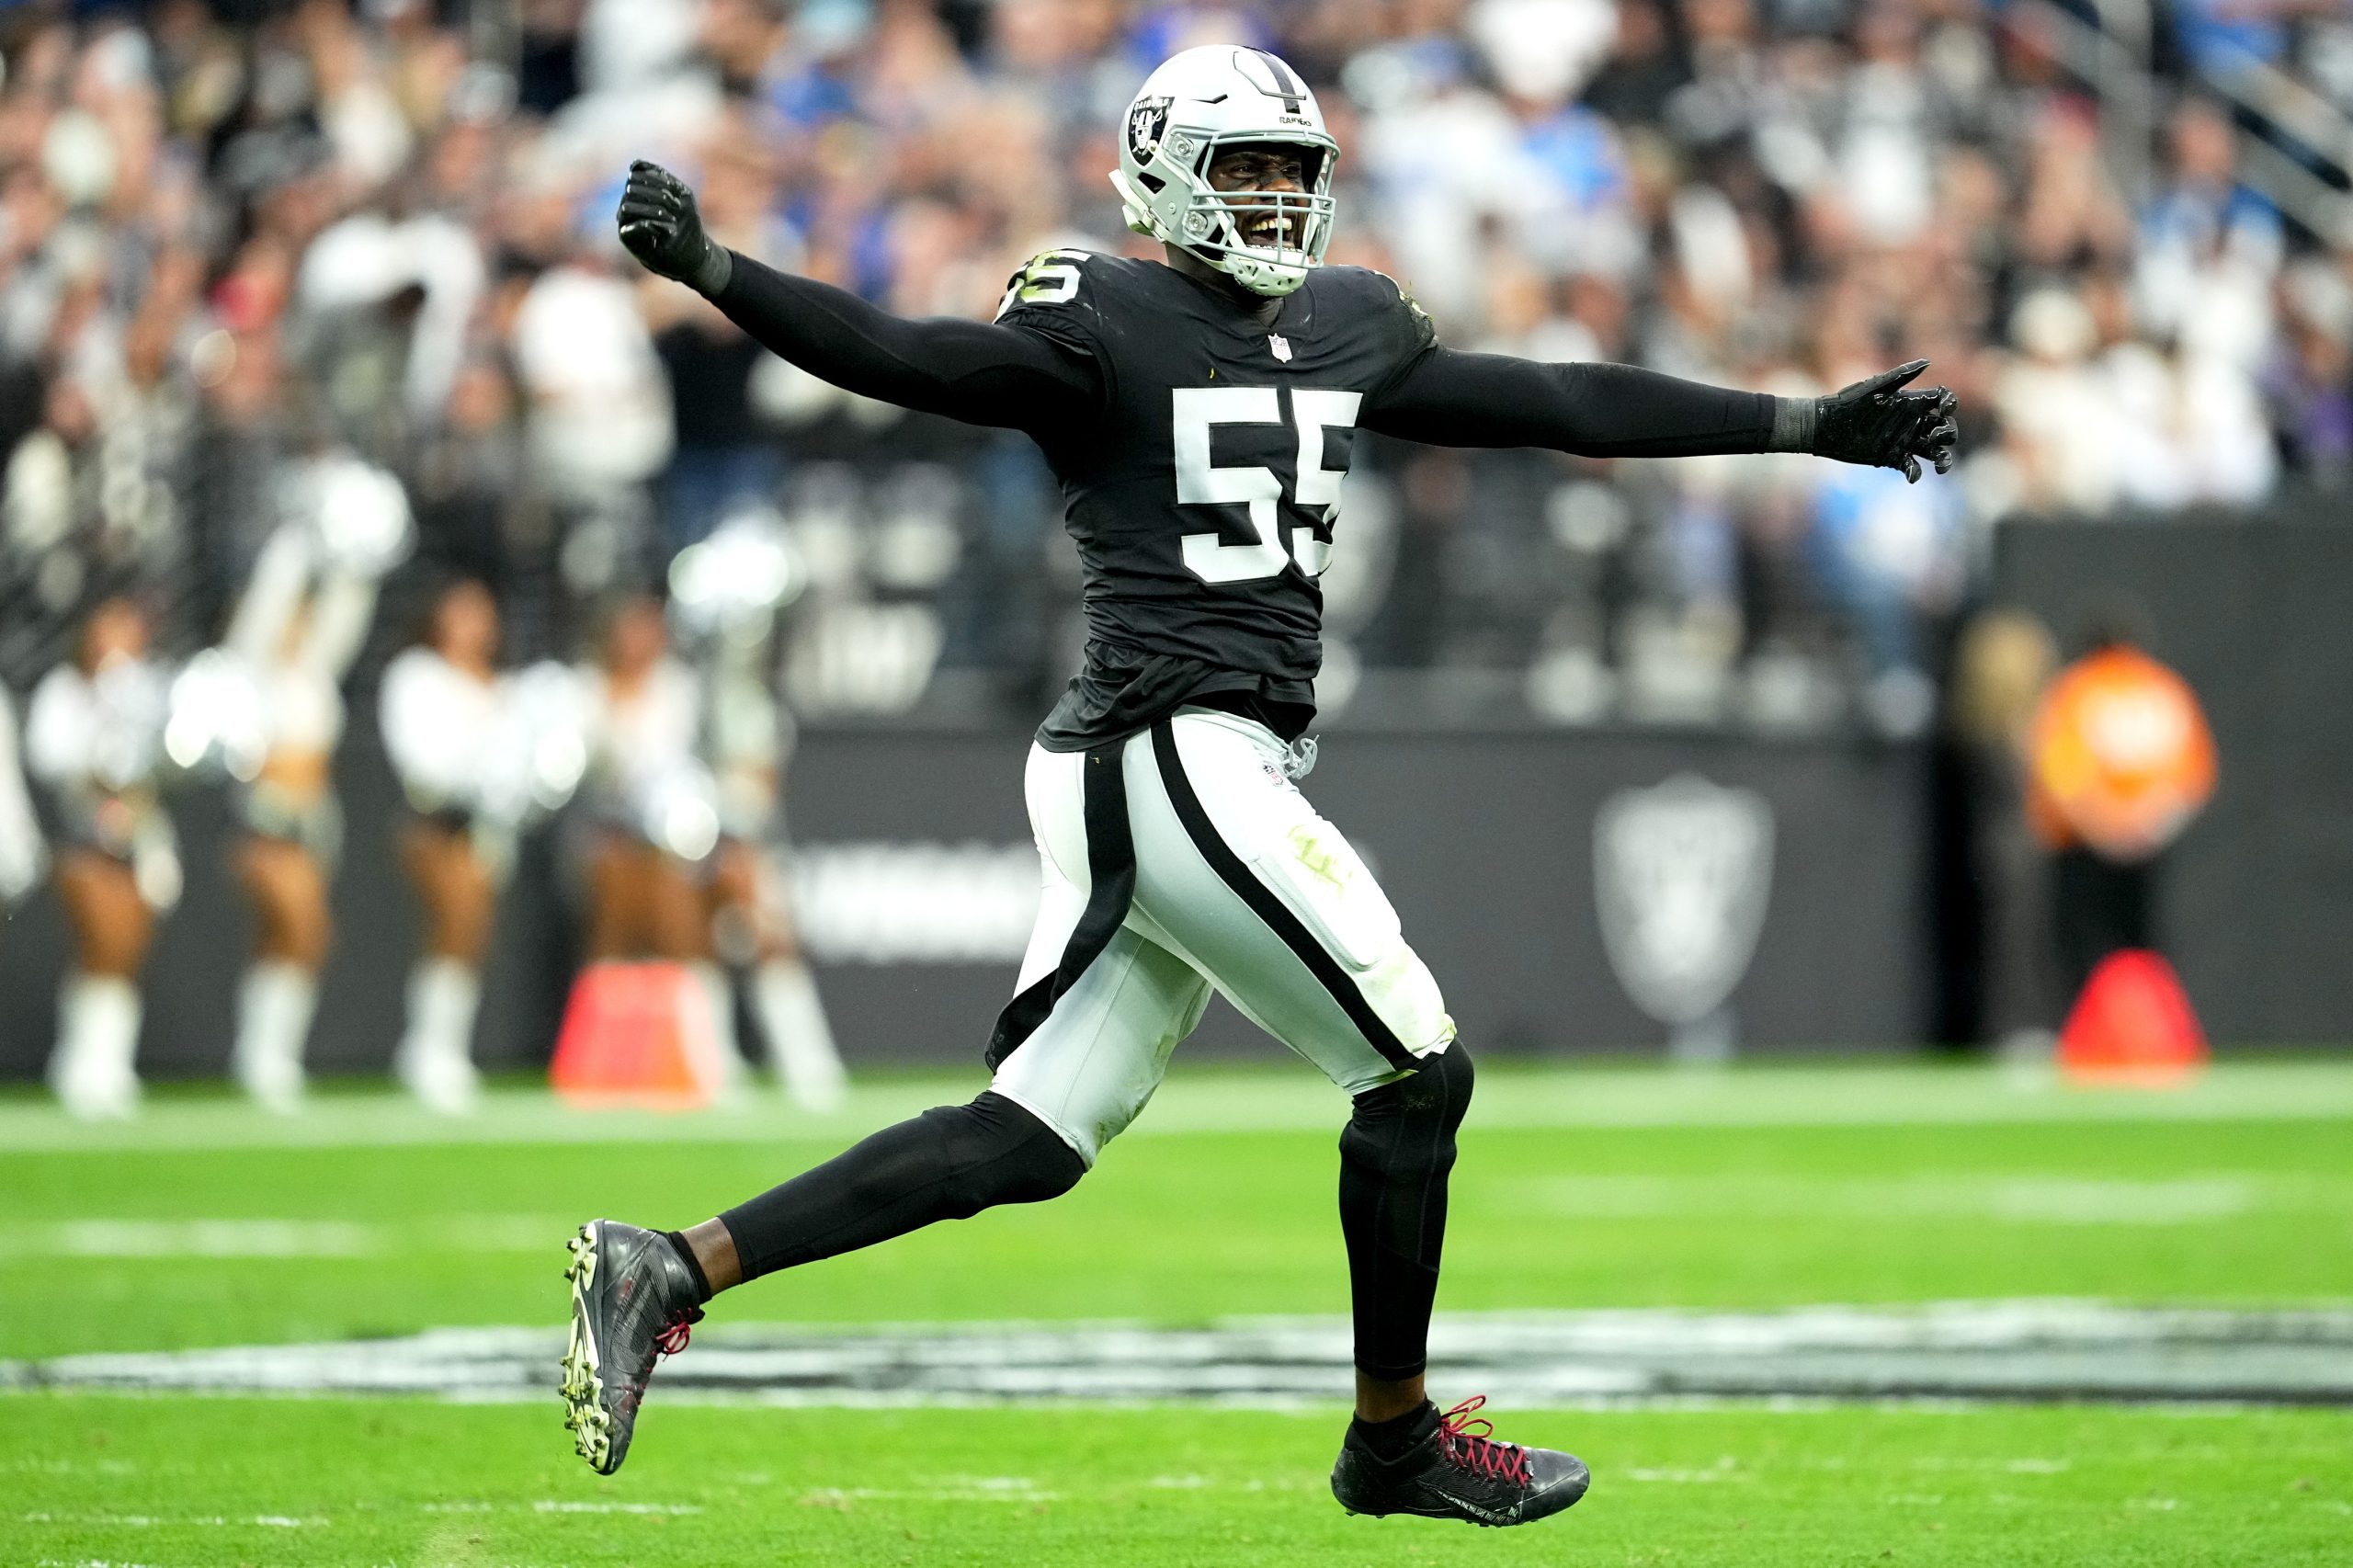 Chandler Jones #55 of the Las Vegas Raiders reacts after a tackle to force a turnover on downs in t...